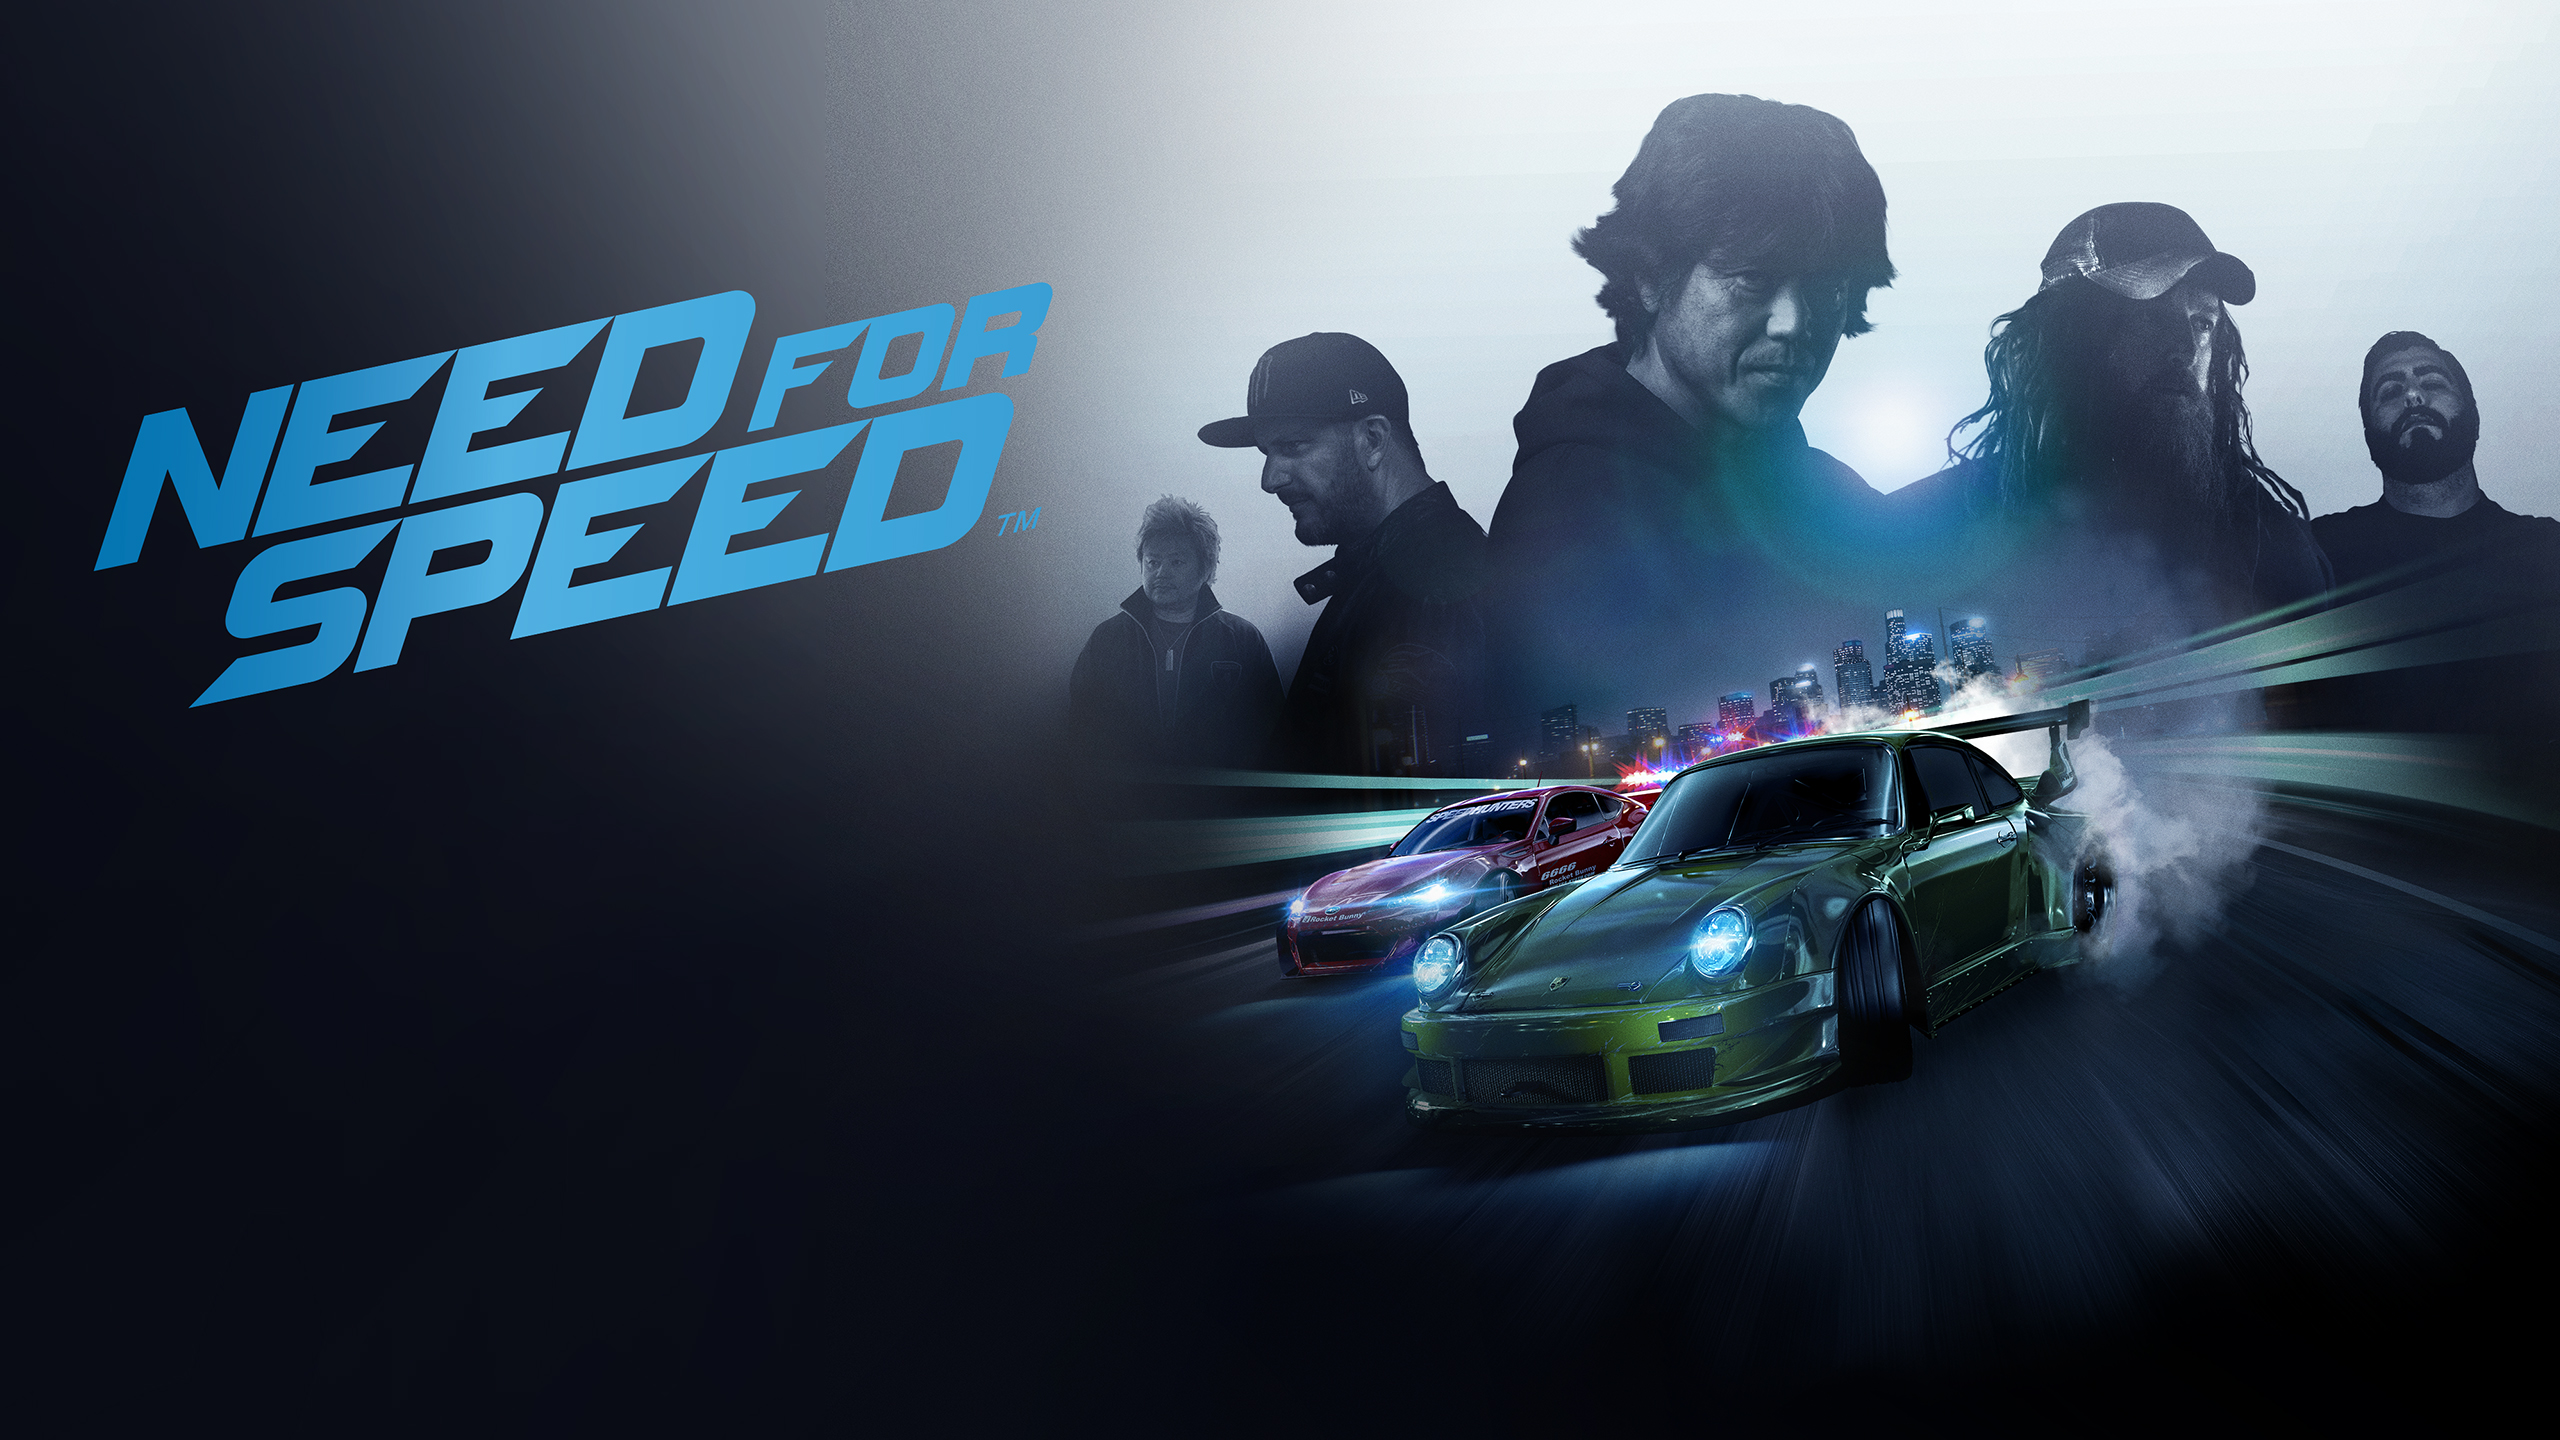 Video Game Need For Speed 2015 2560x1440